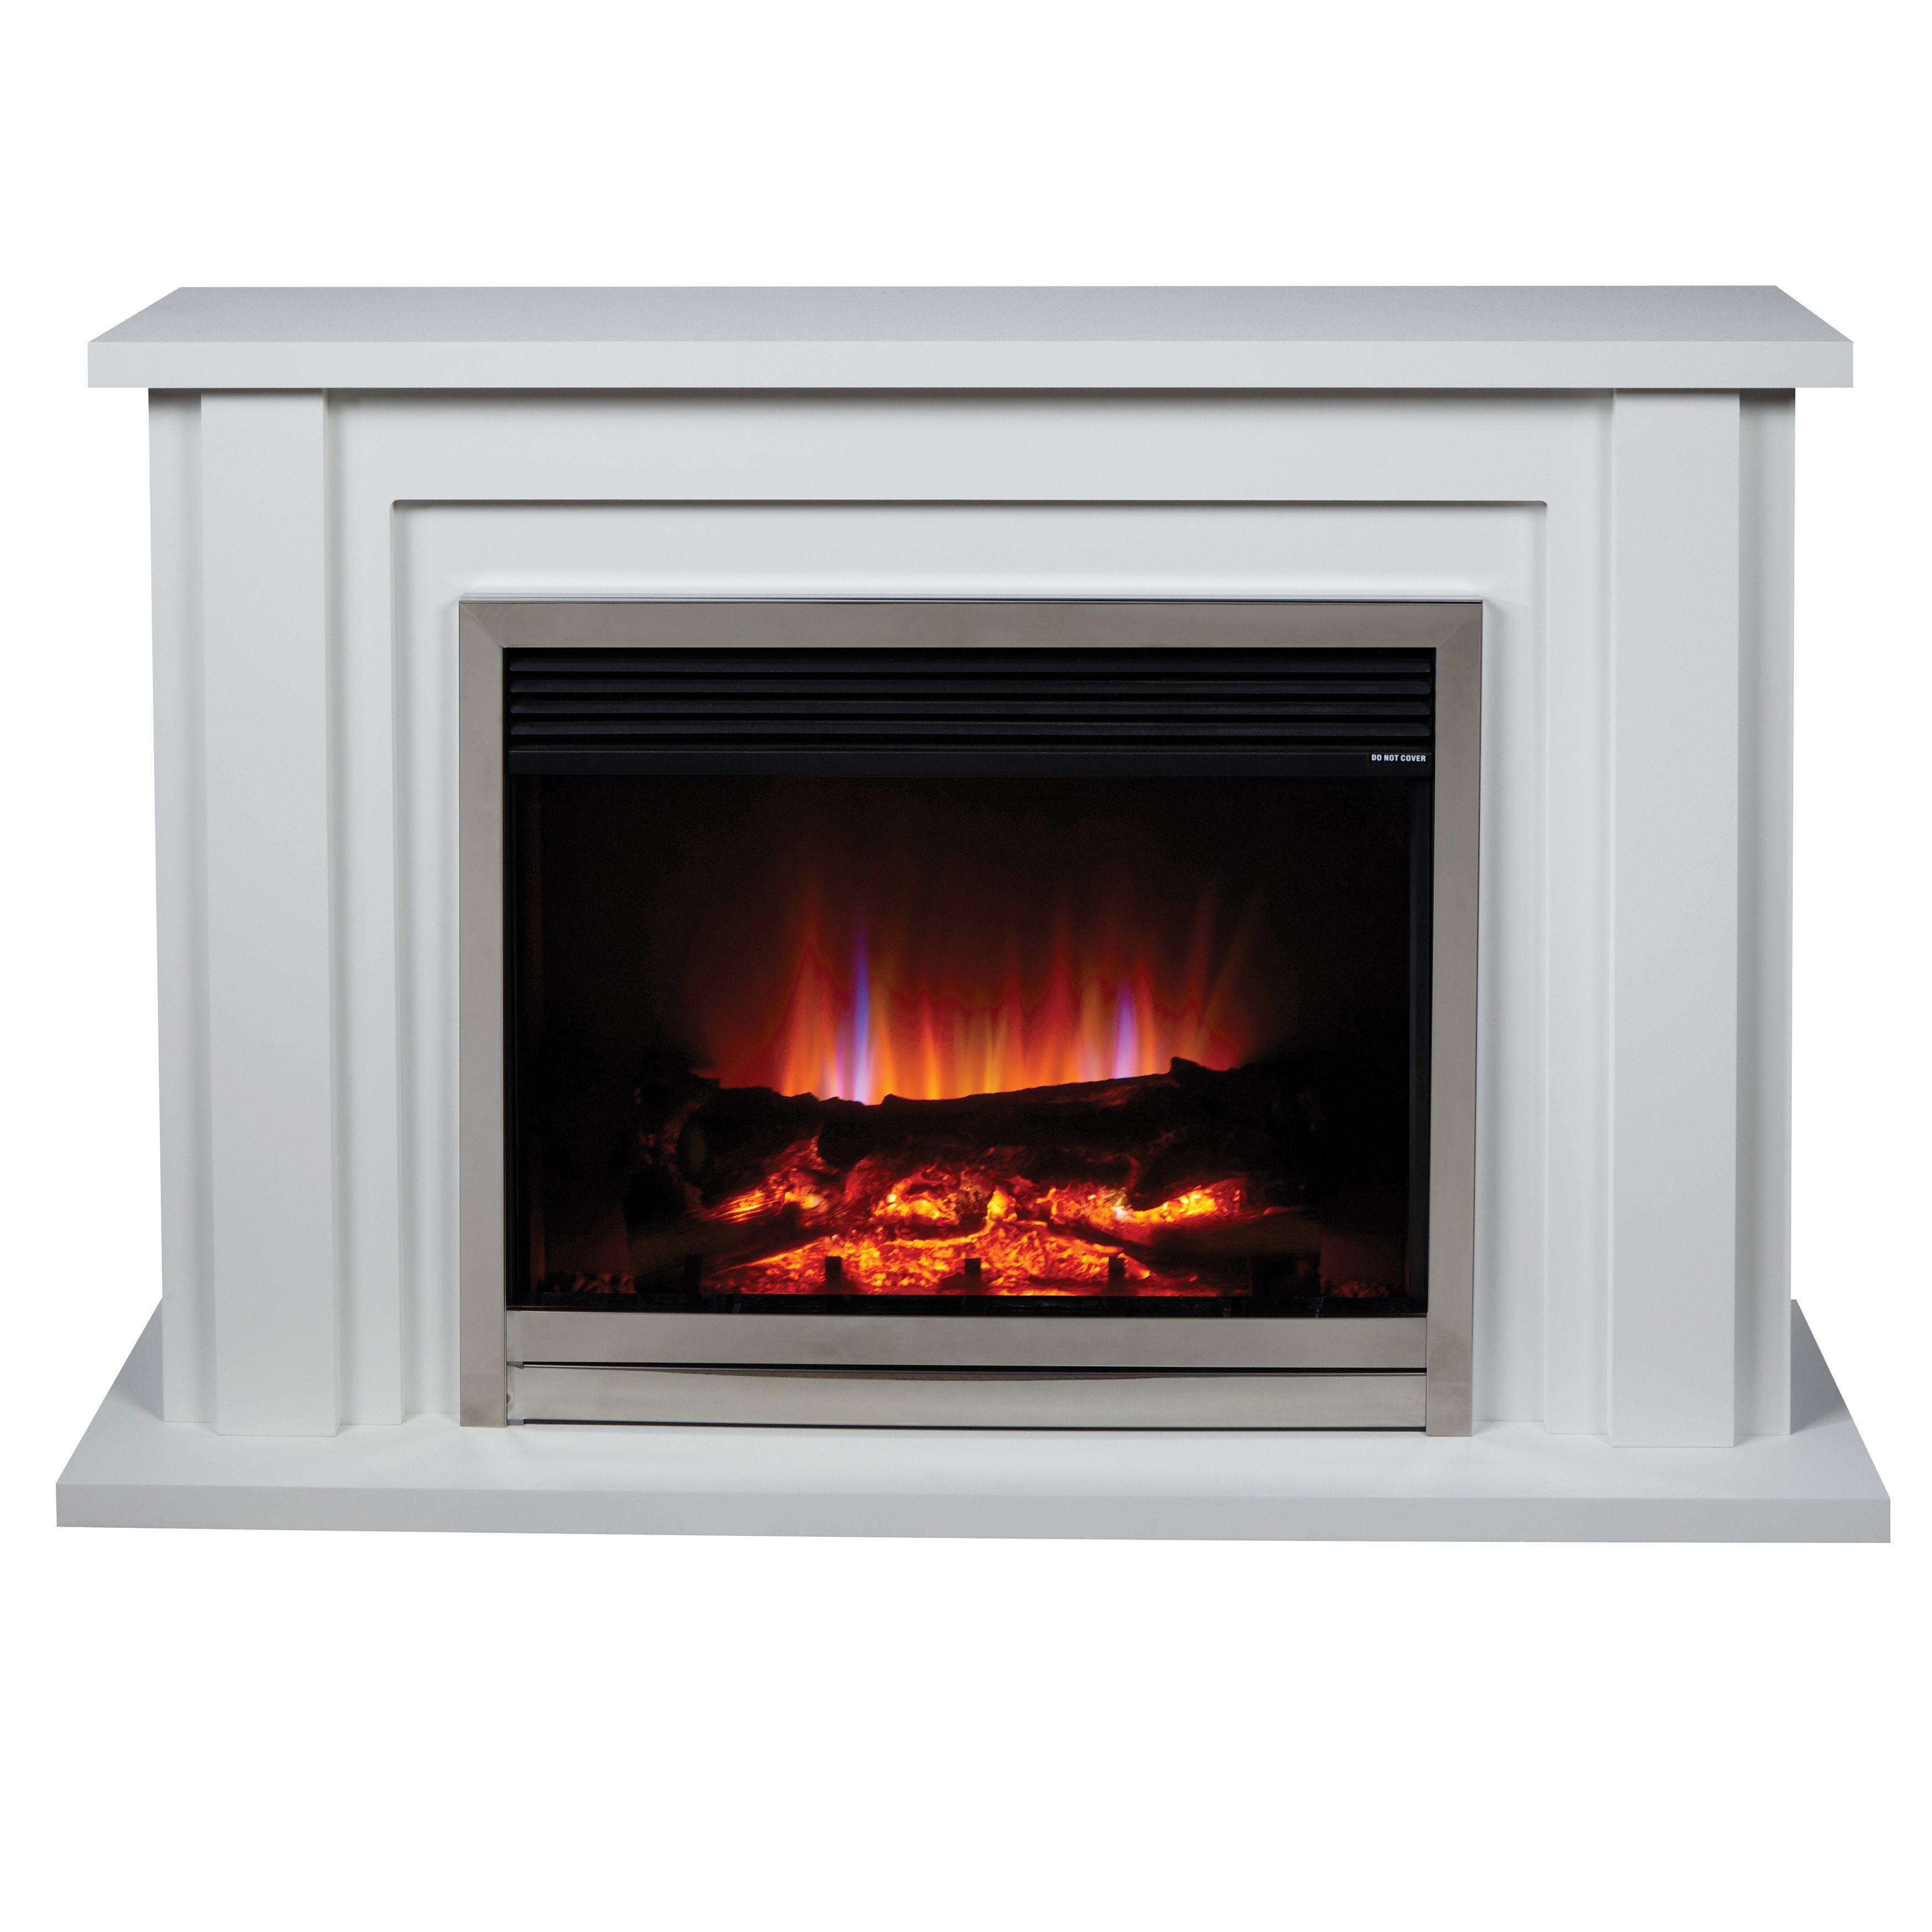 Suncrest Vermont White Stone effect MDF & stainless steel Freestanding Electric fire suite